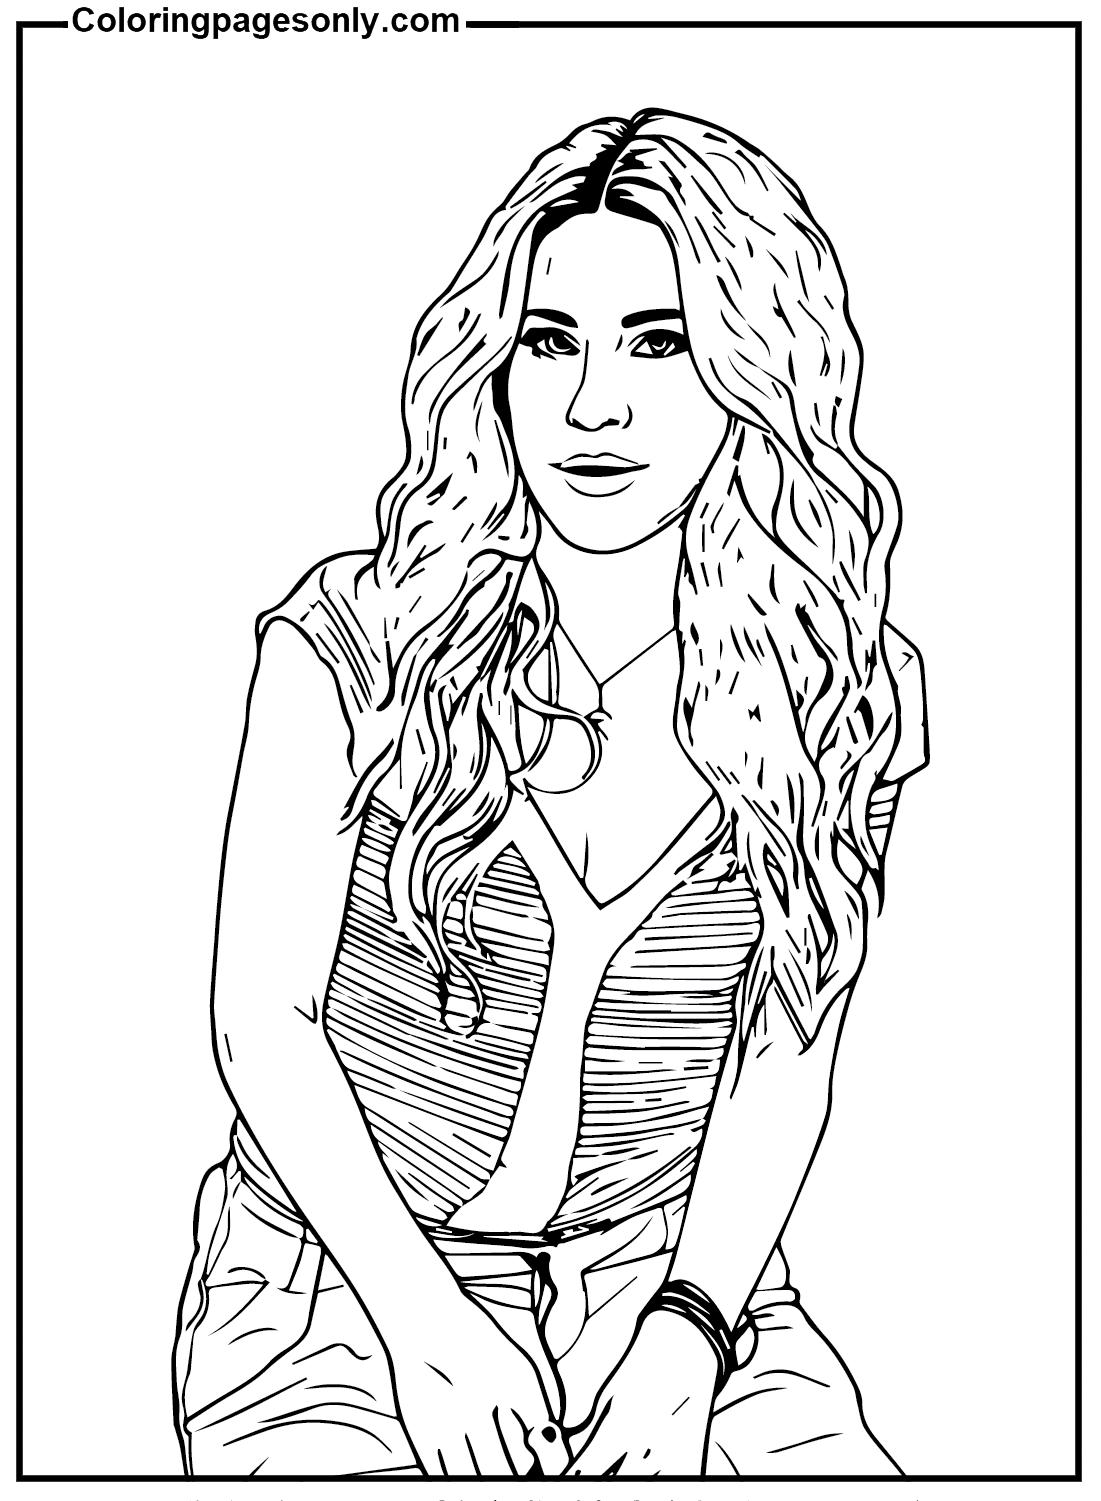 Shakira Super Bowl Coloring Pages